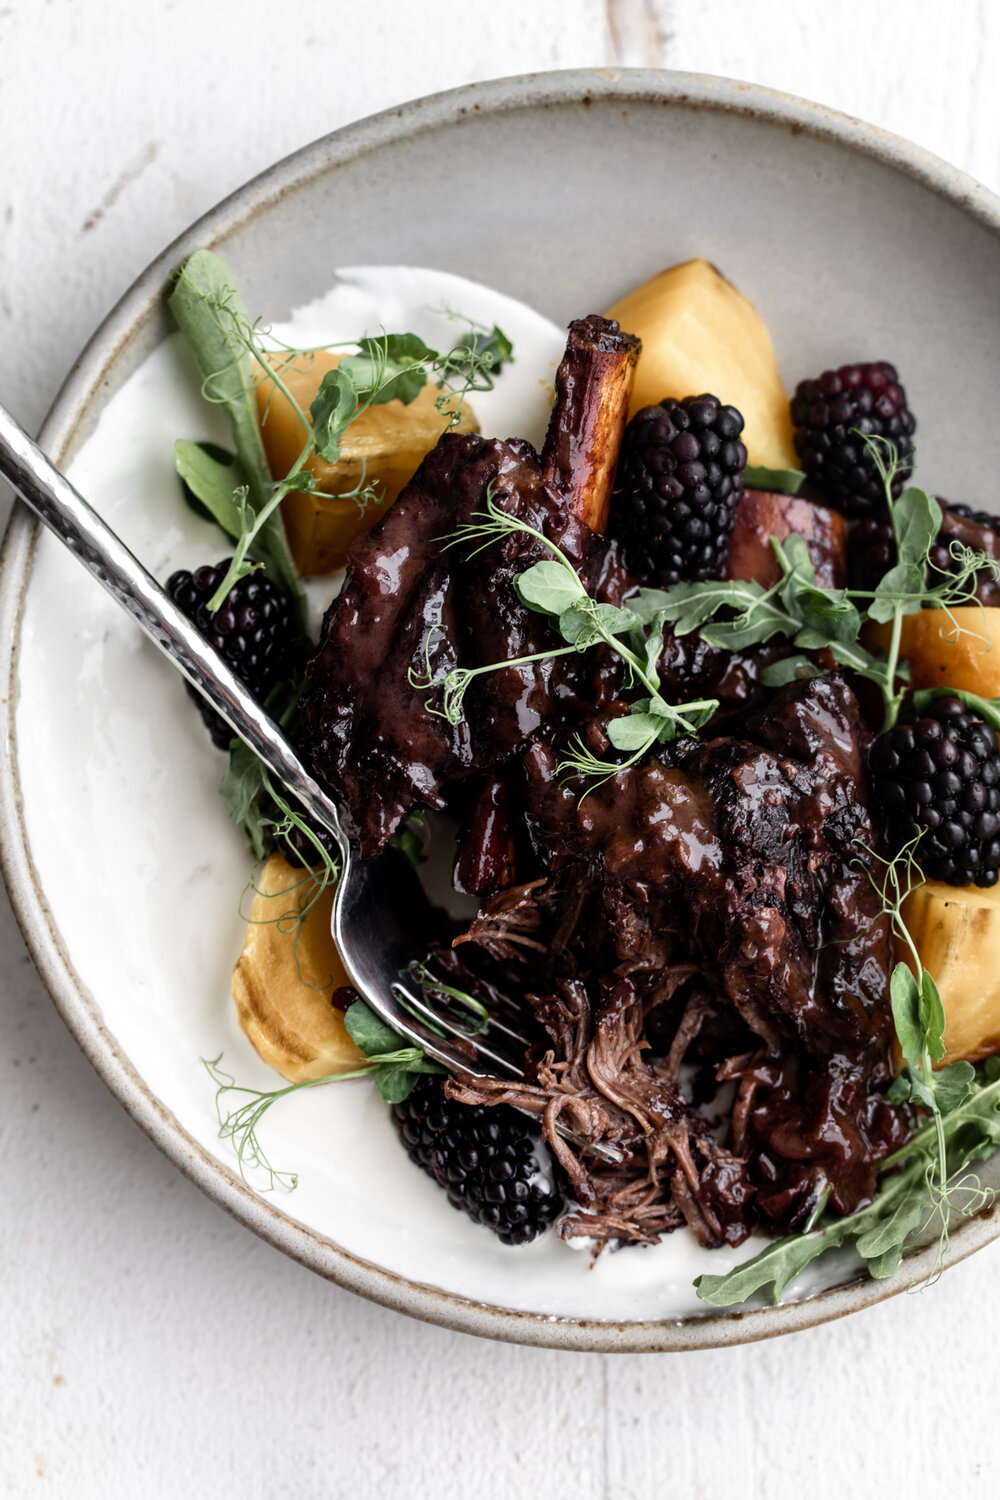 Blackberry Short Ribs with Whipped Ricotta and Roasted Beets with pea shoots